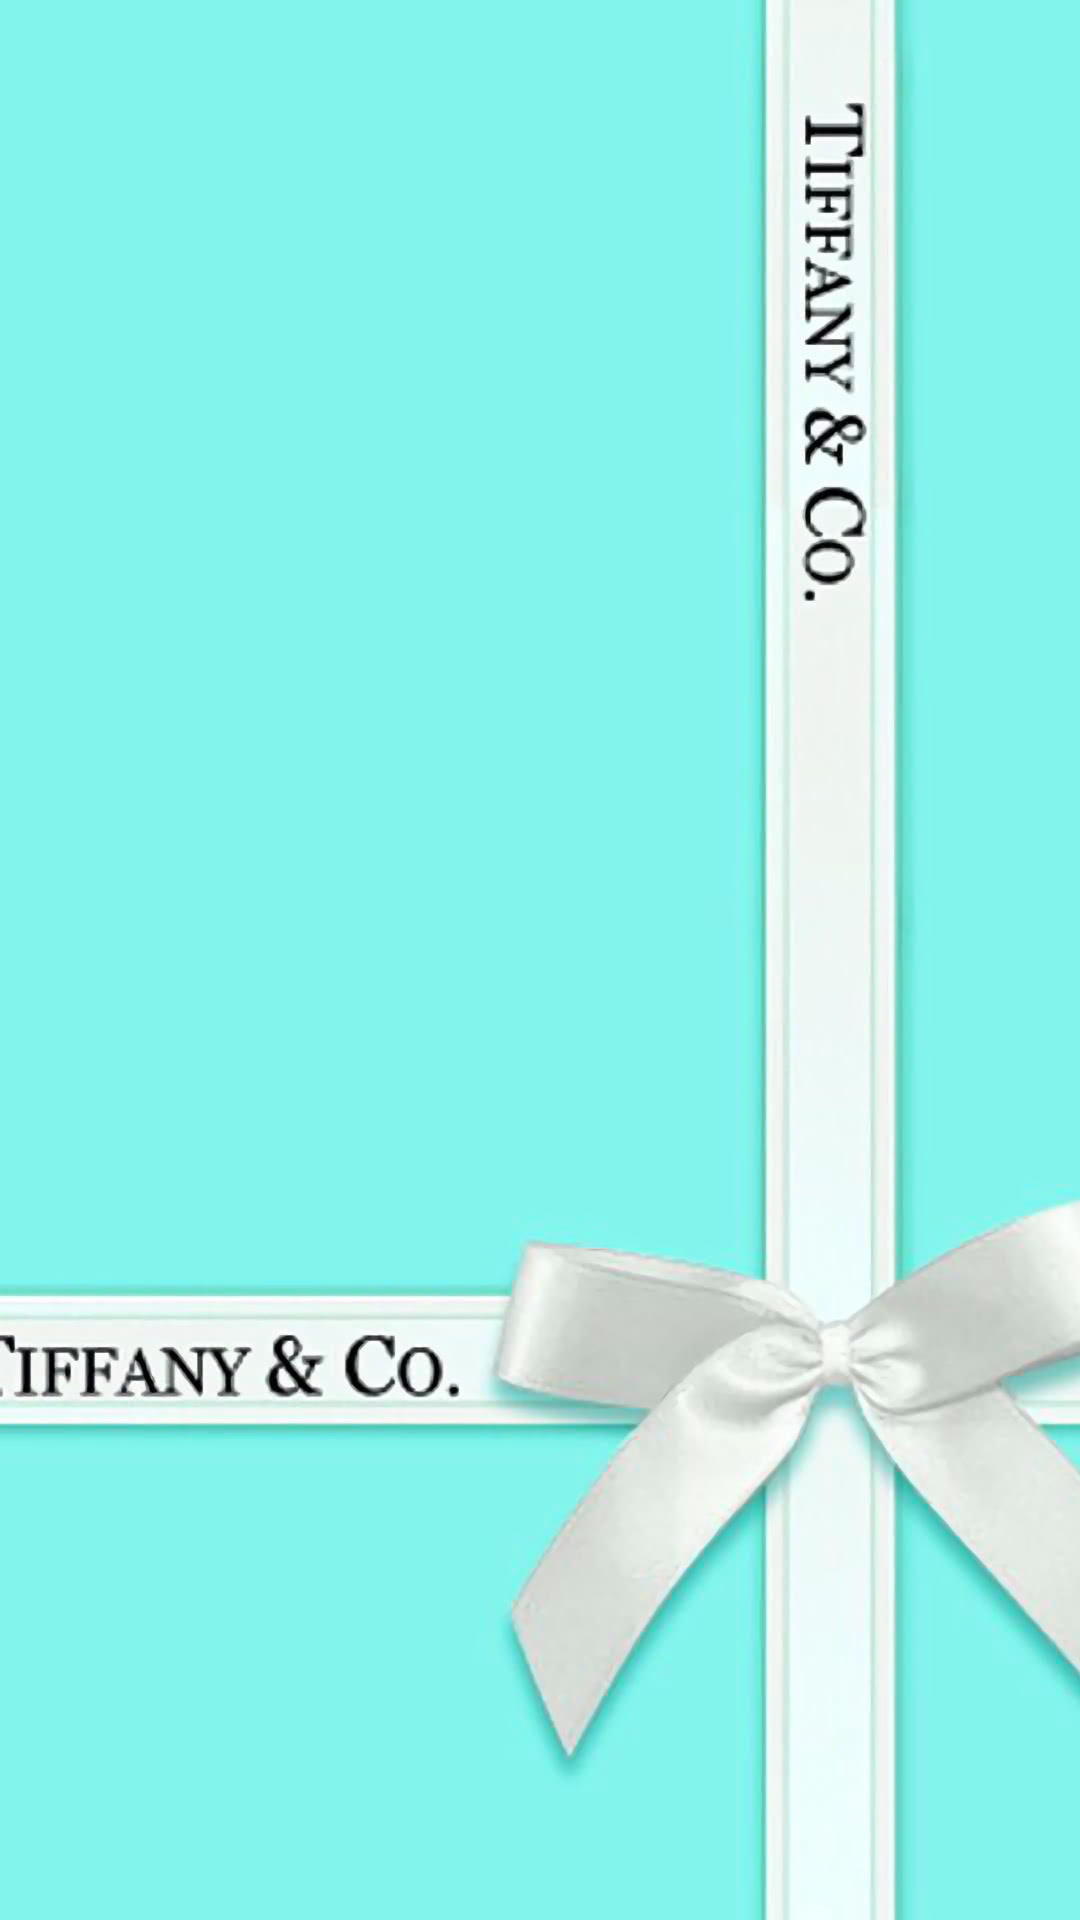 Tiffany & Co: International recognition at the 1867 Paris World’s fair, Tiffany’s memorable blue color. 1080x1920 Full HD Background.